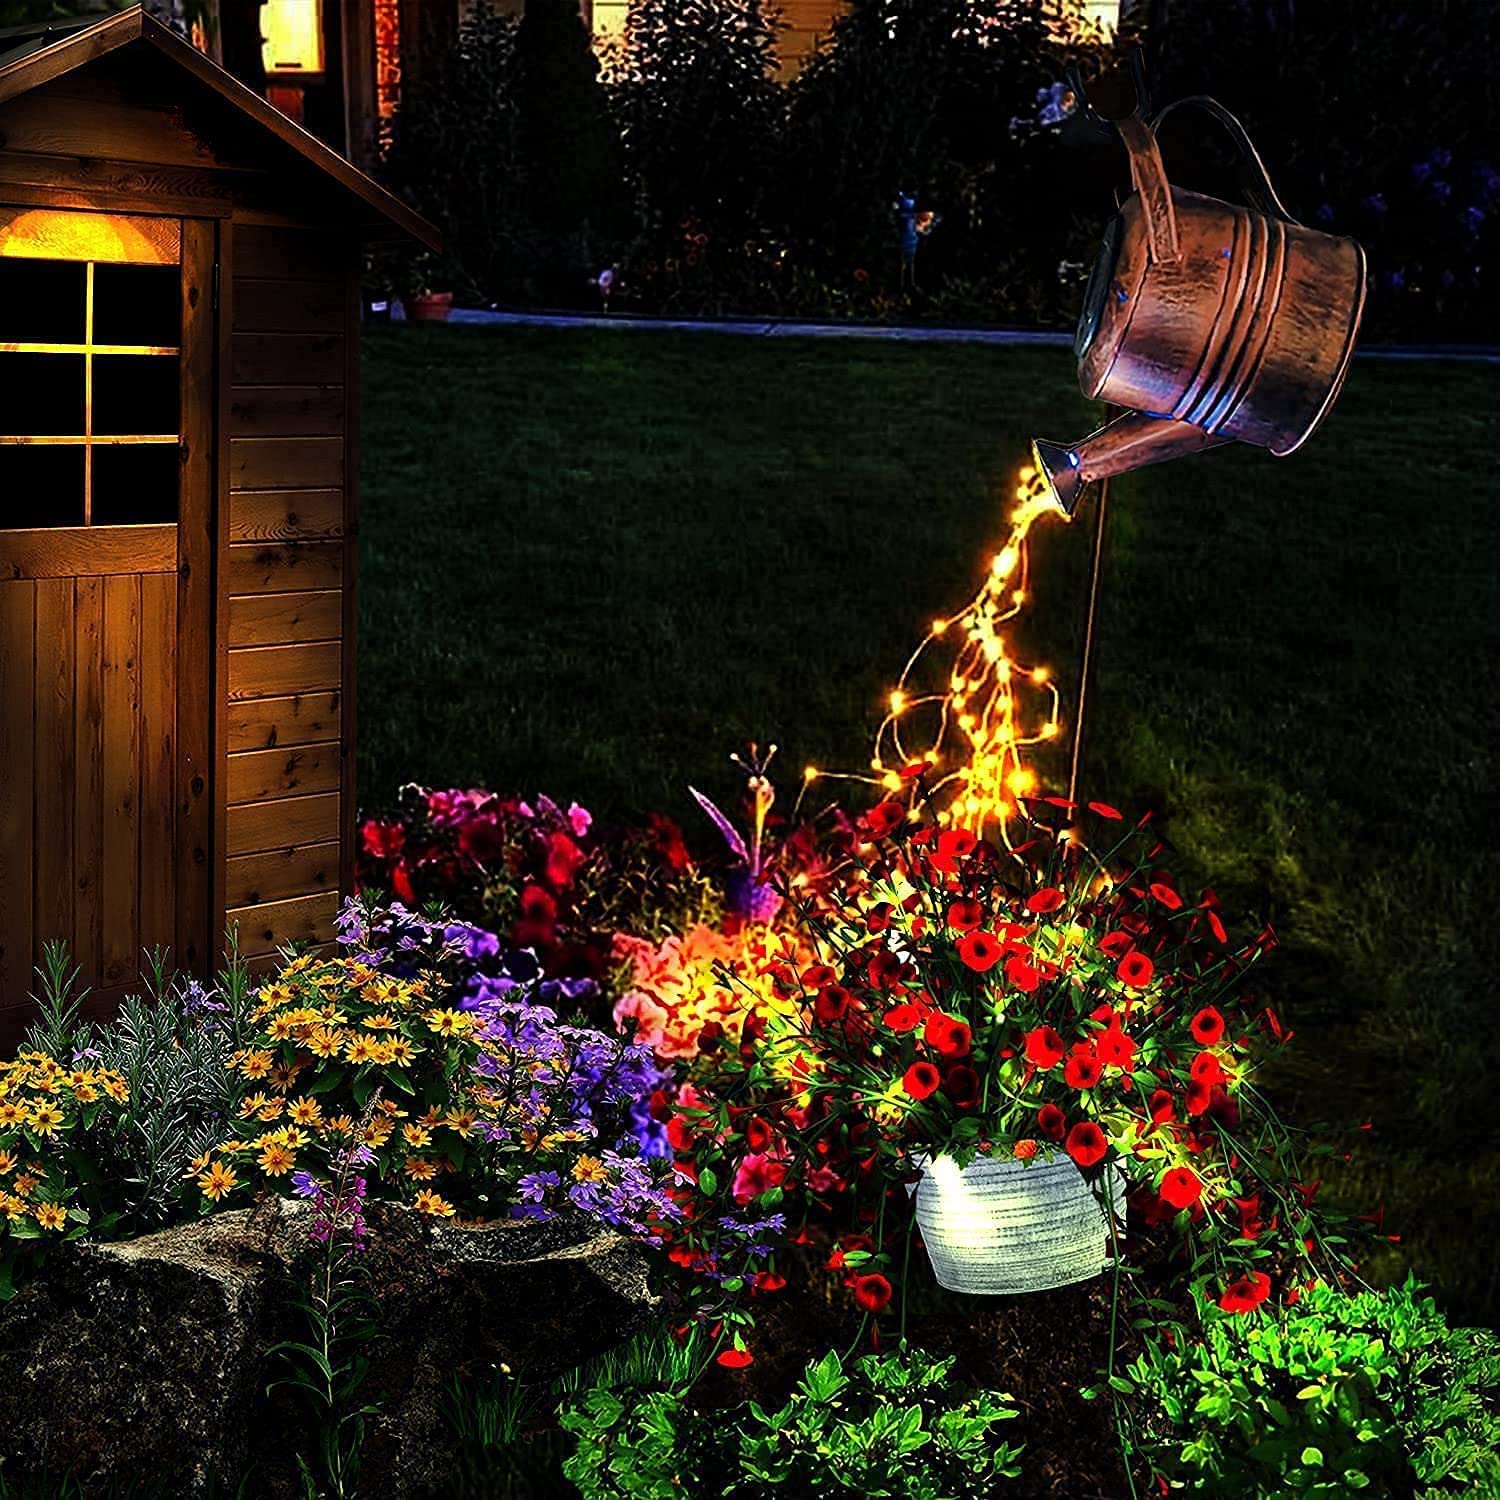 Details about   Starry Sky Shower LED Watering Can Fairy Garden Lights String Outdoor Party Xmas